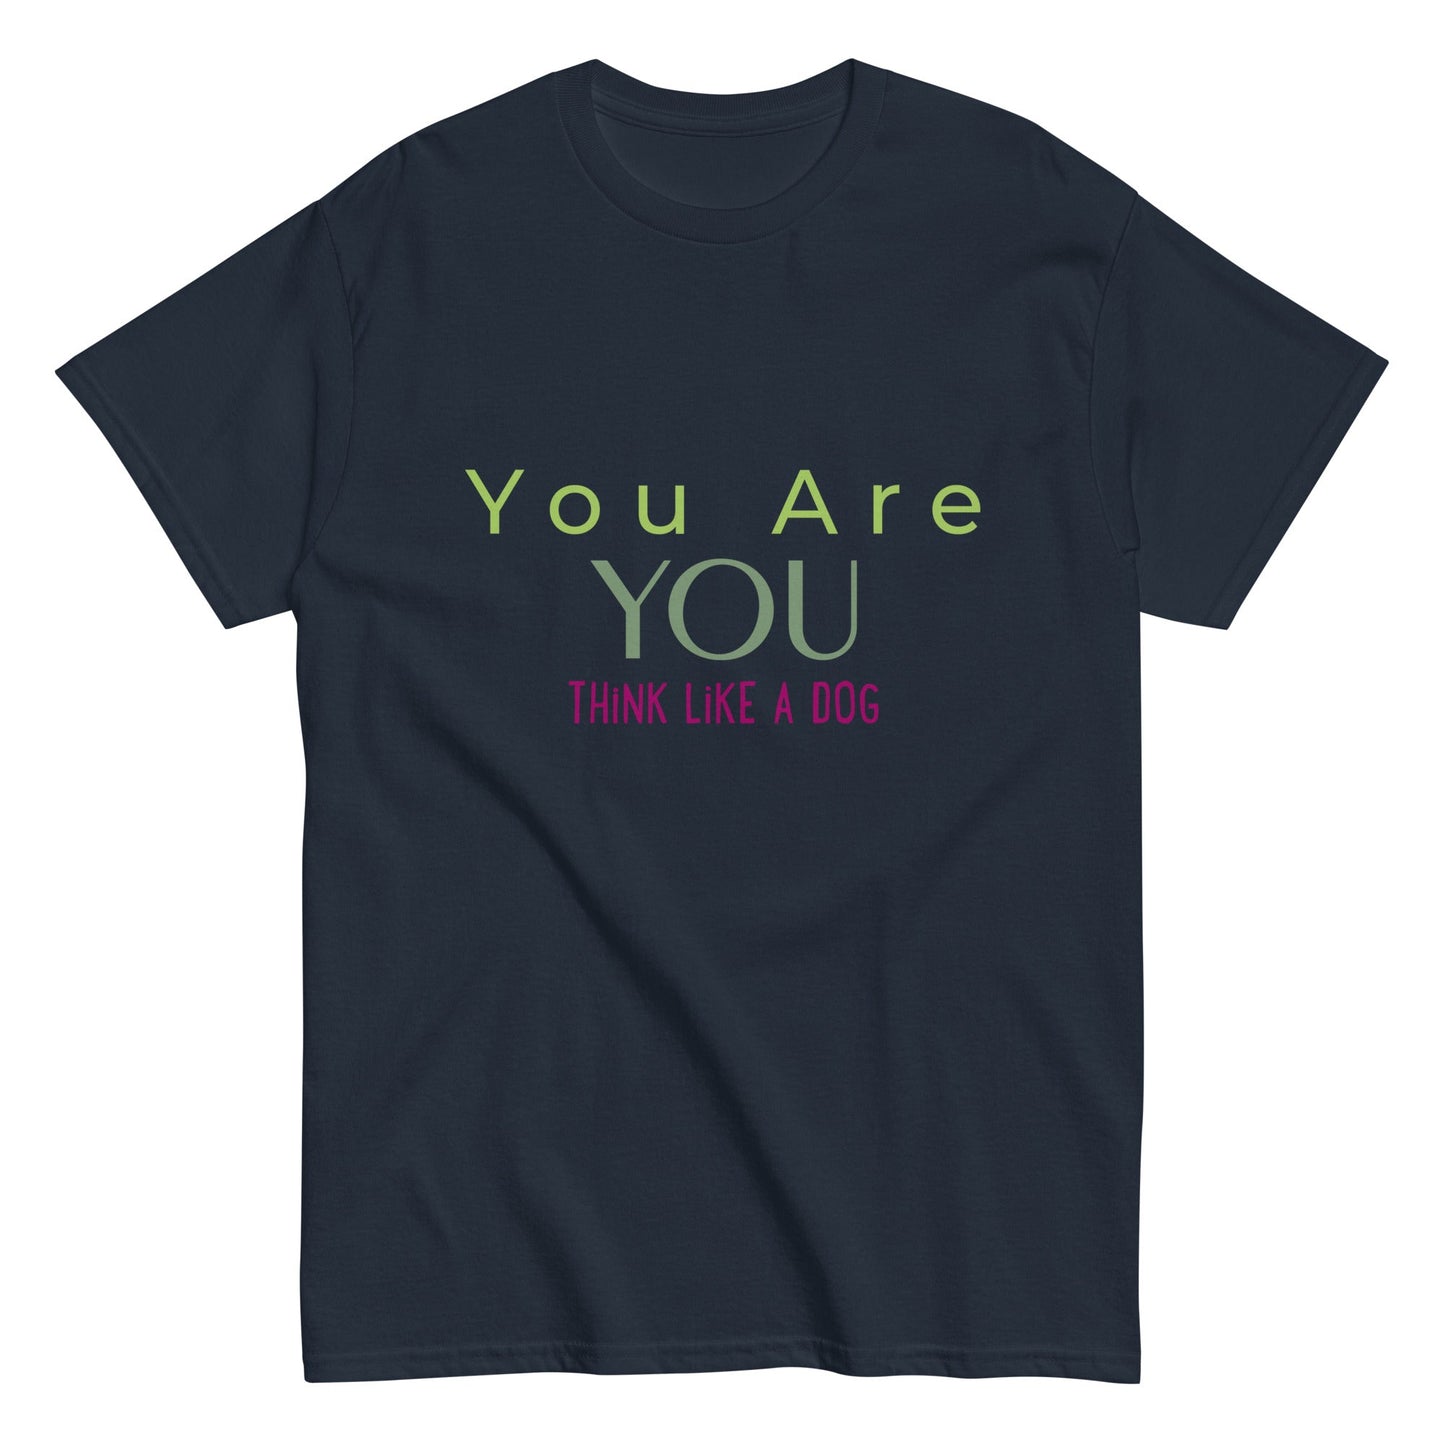 Navy blue T-shirt with text: "You Are YOU" in green and "Think Like A Dog" in pink. This Men's Classic Tee You Are You from THiNK LiKE A DOG® boasts a durable design, crafted from 100% pure cotton for ultimate comfort.